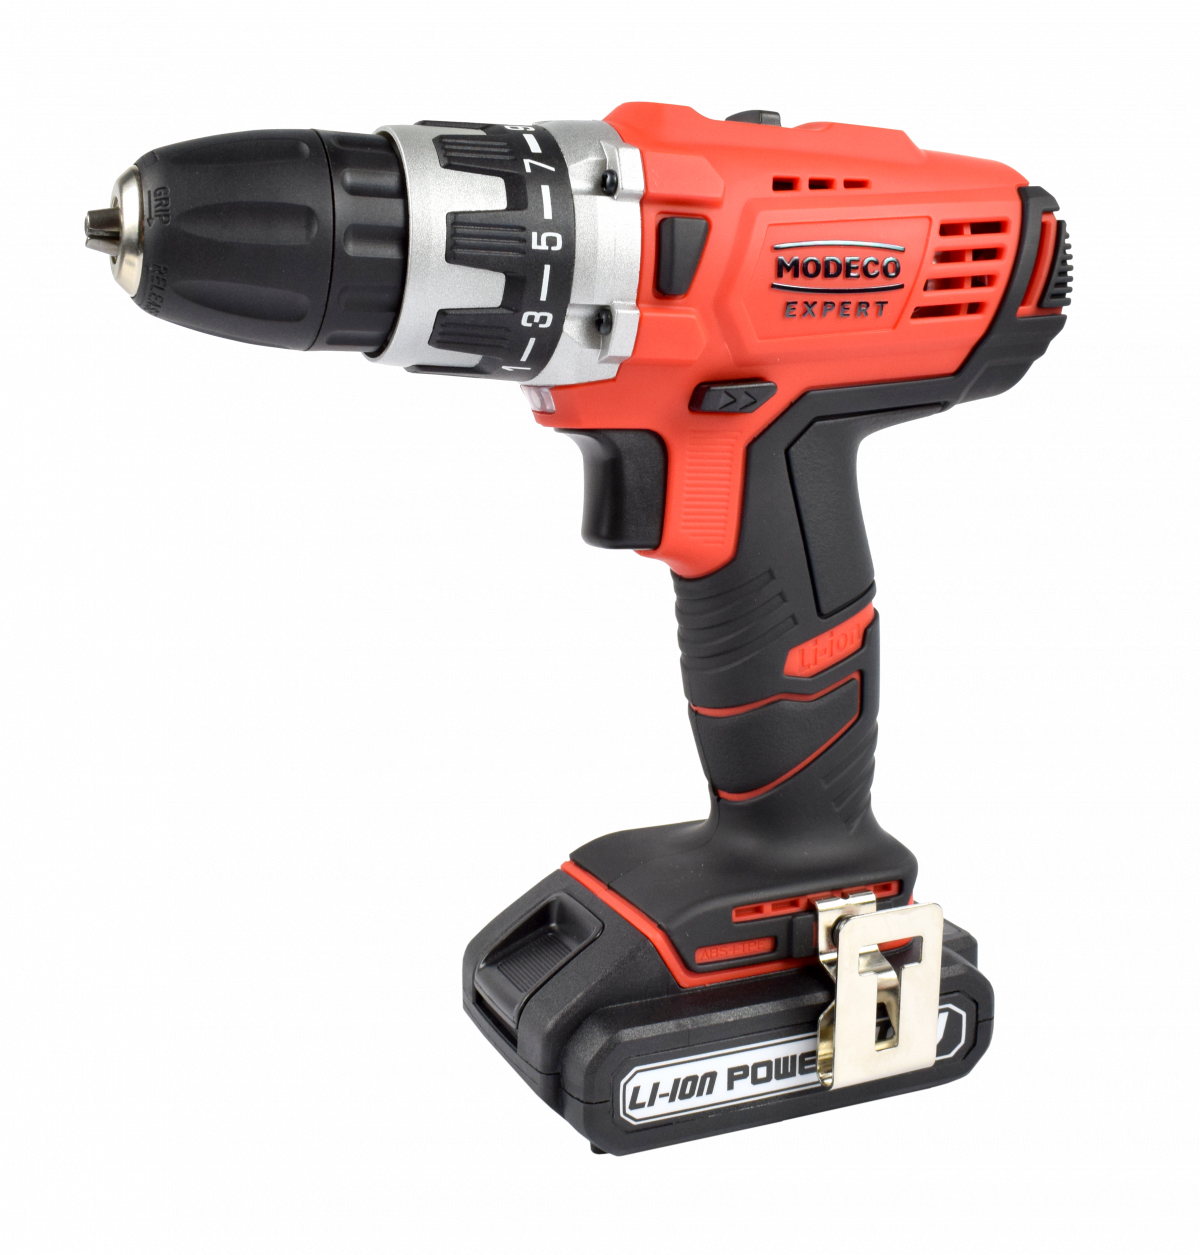 MN-91-104 Cordless drill-driver with battery 14.4 V li-ion